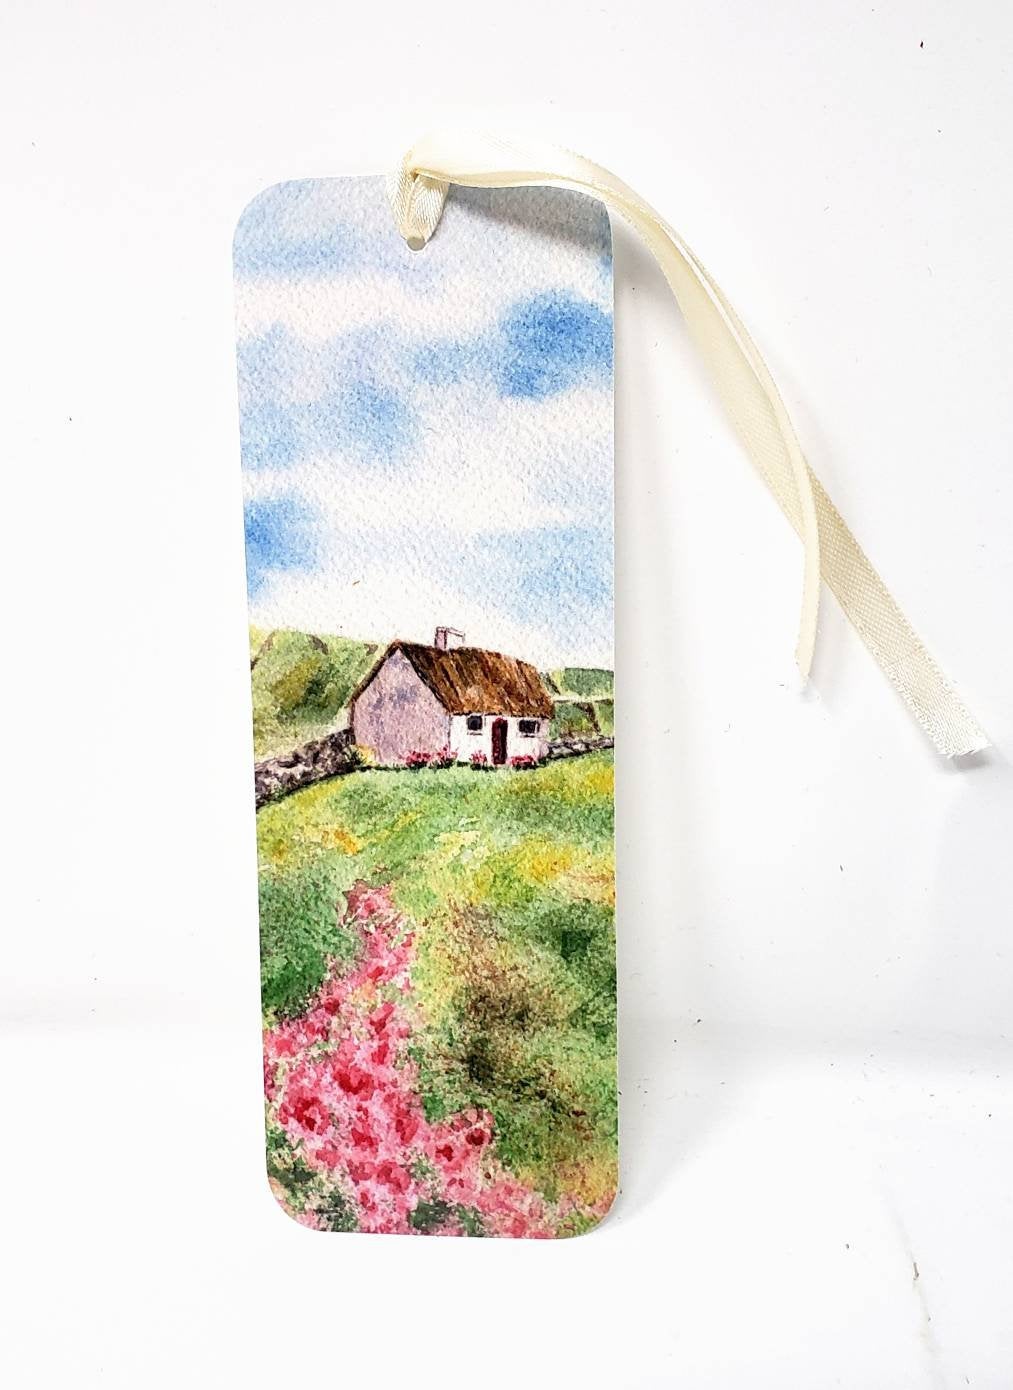 Irish Cottage By The Sea Bookmarker Irish gift stocking stuffer teacher gift Irish gift for reader gift for mom - Leigh Barry Watercolors